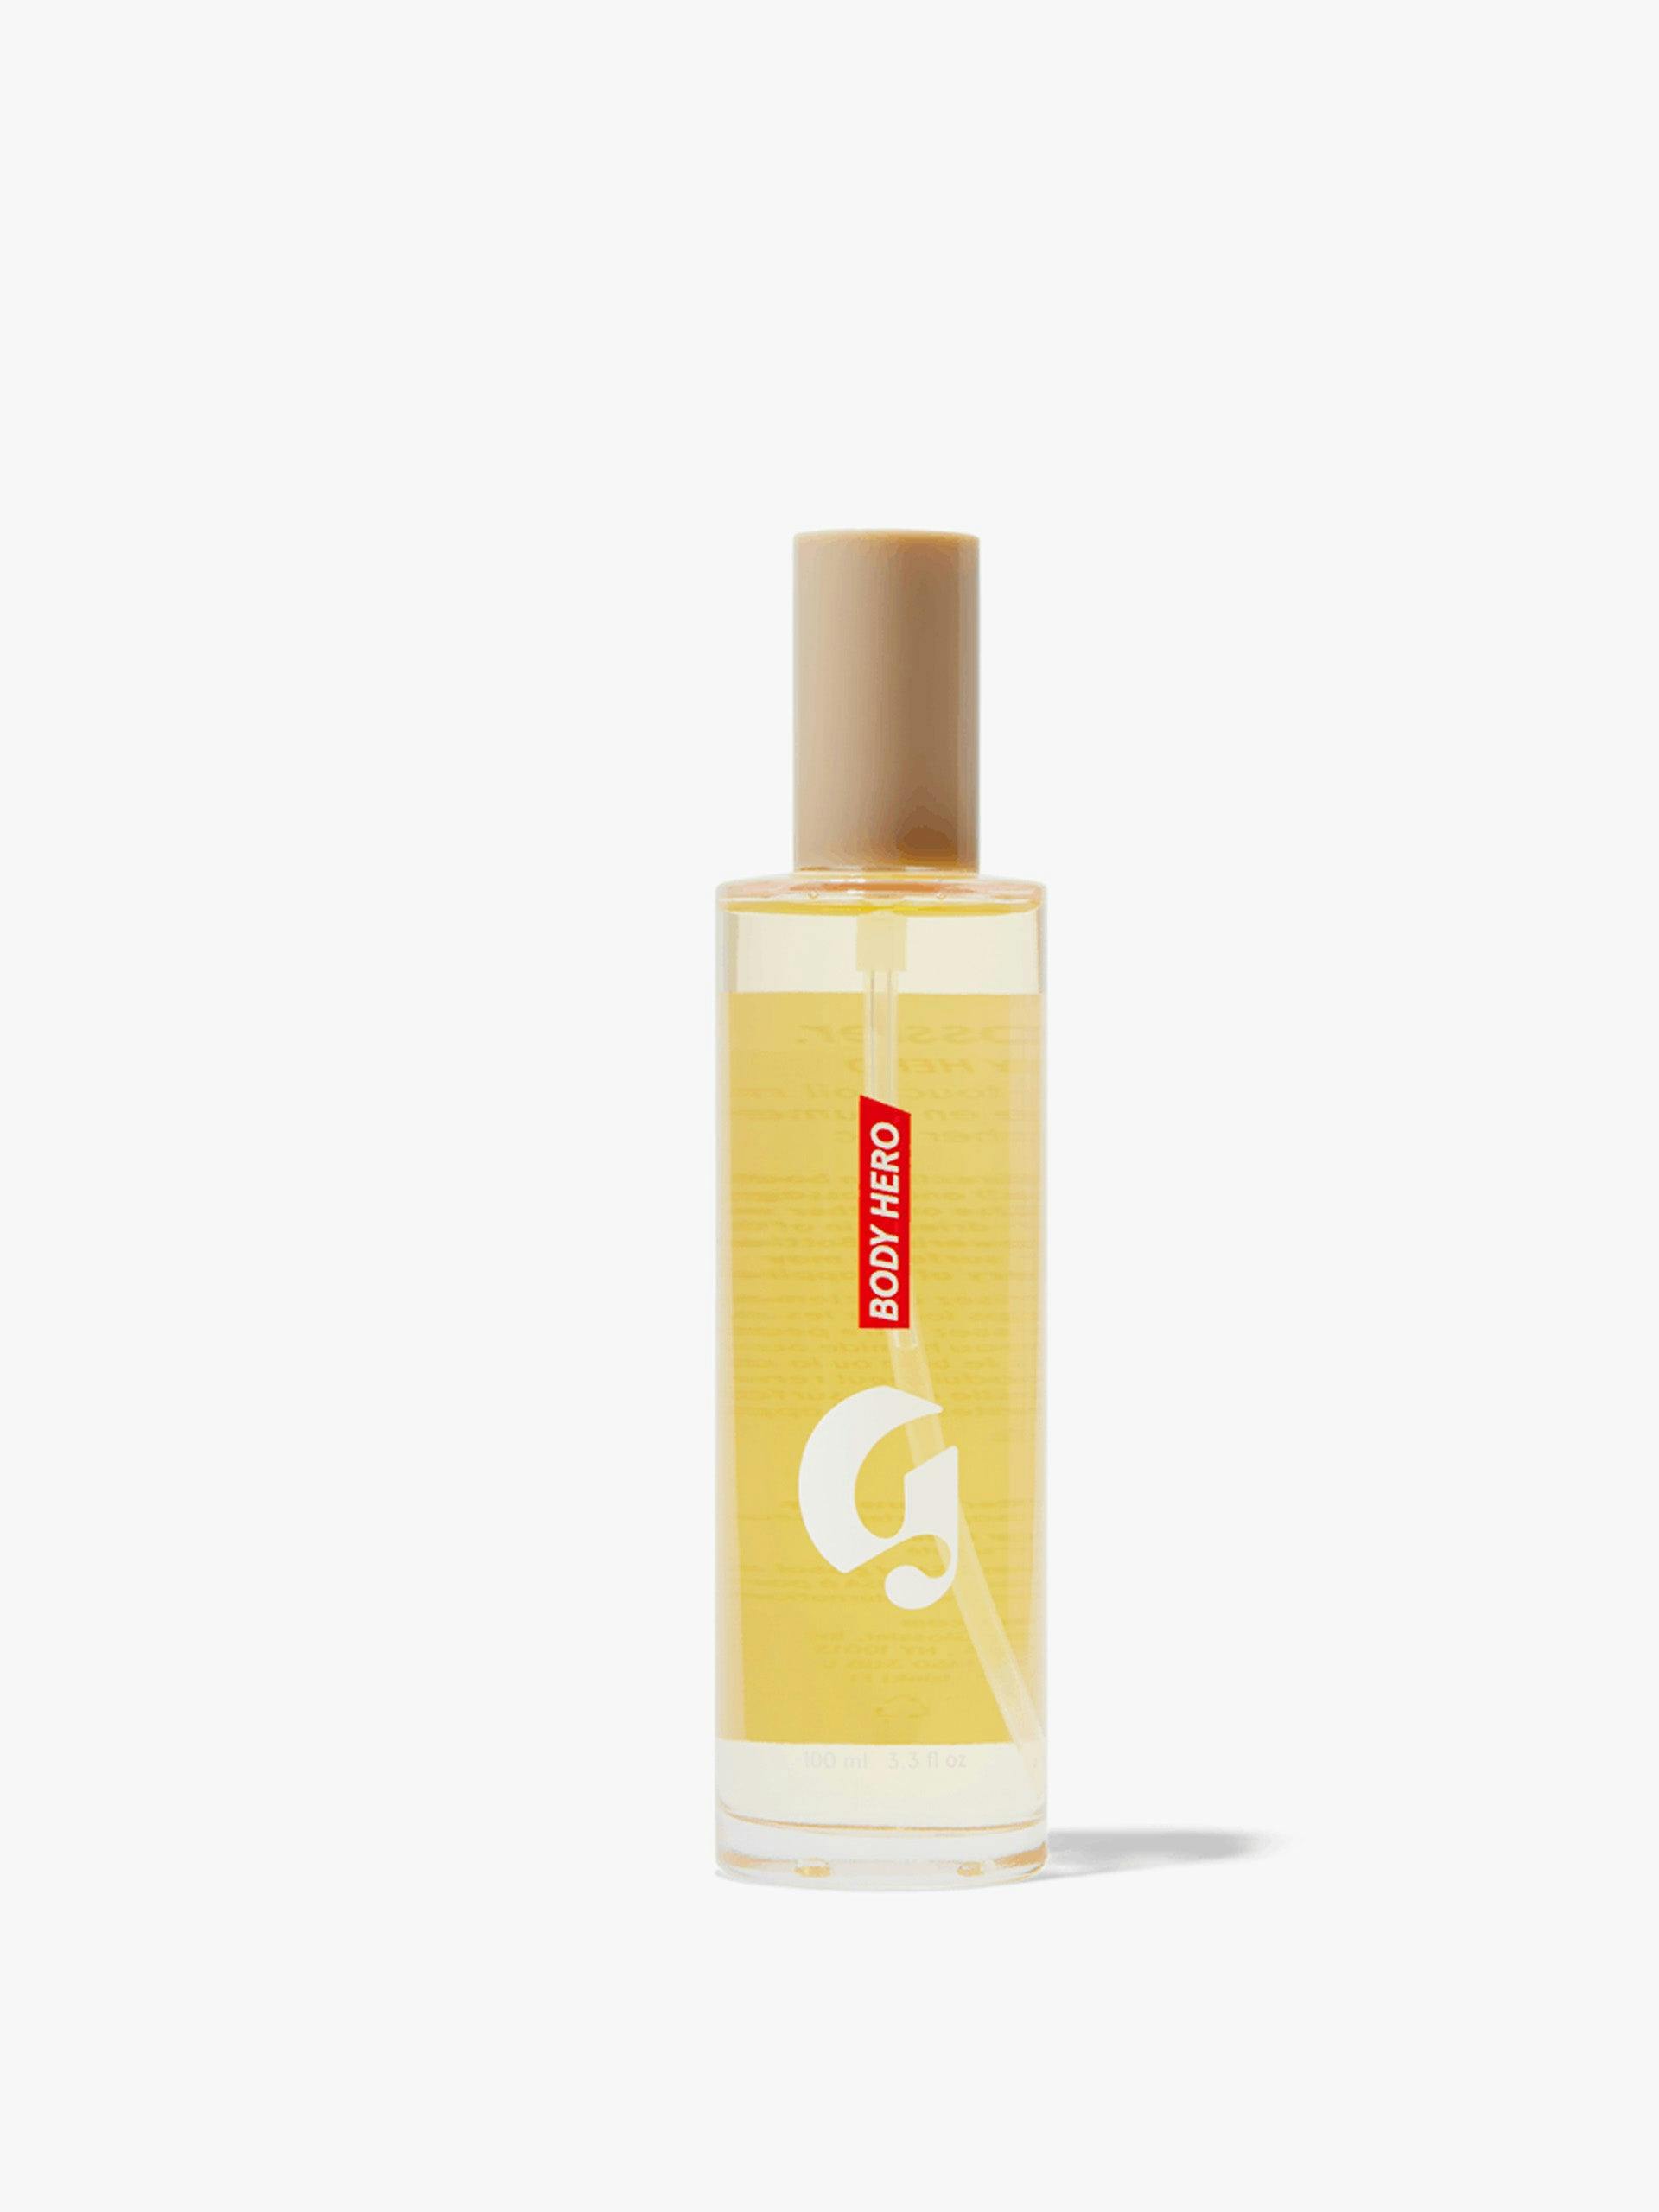 Dry-touch oil mist